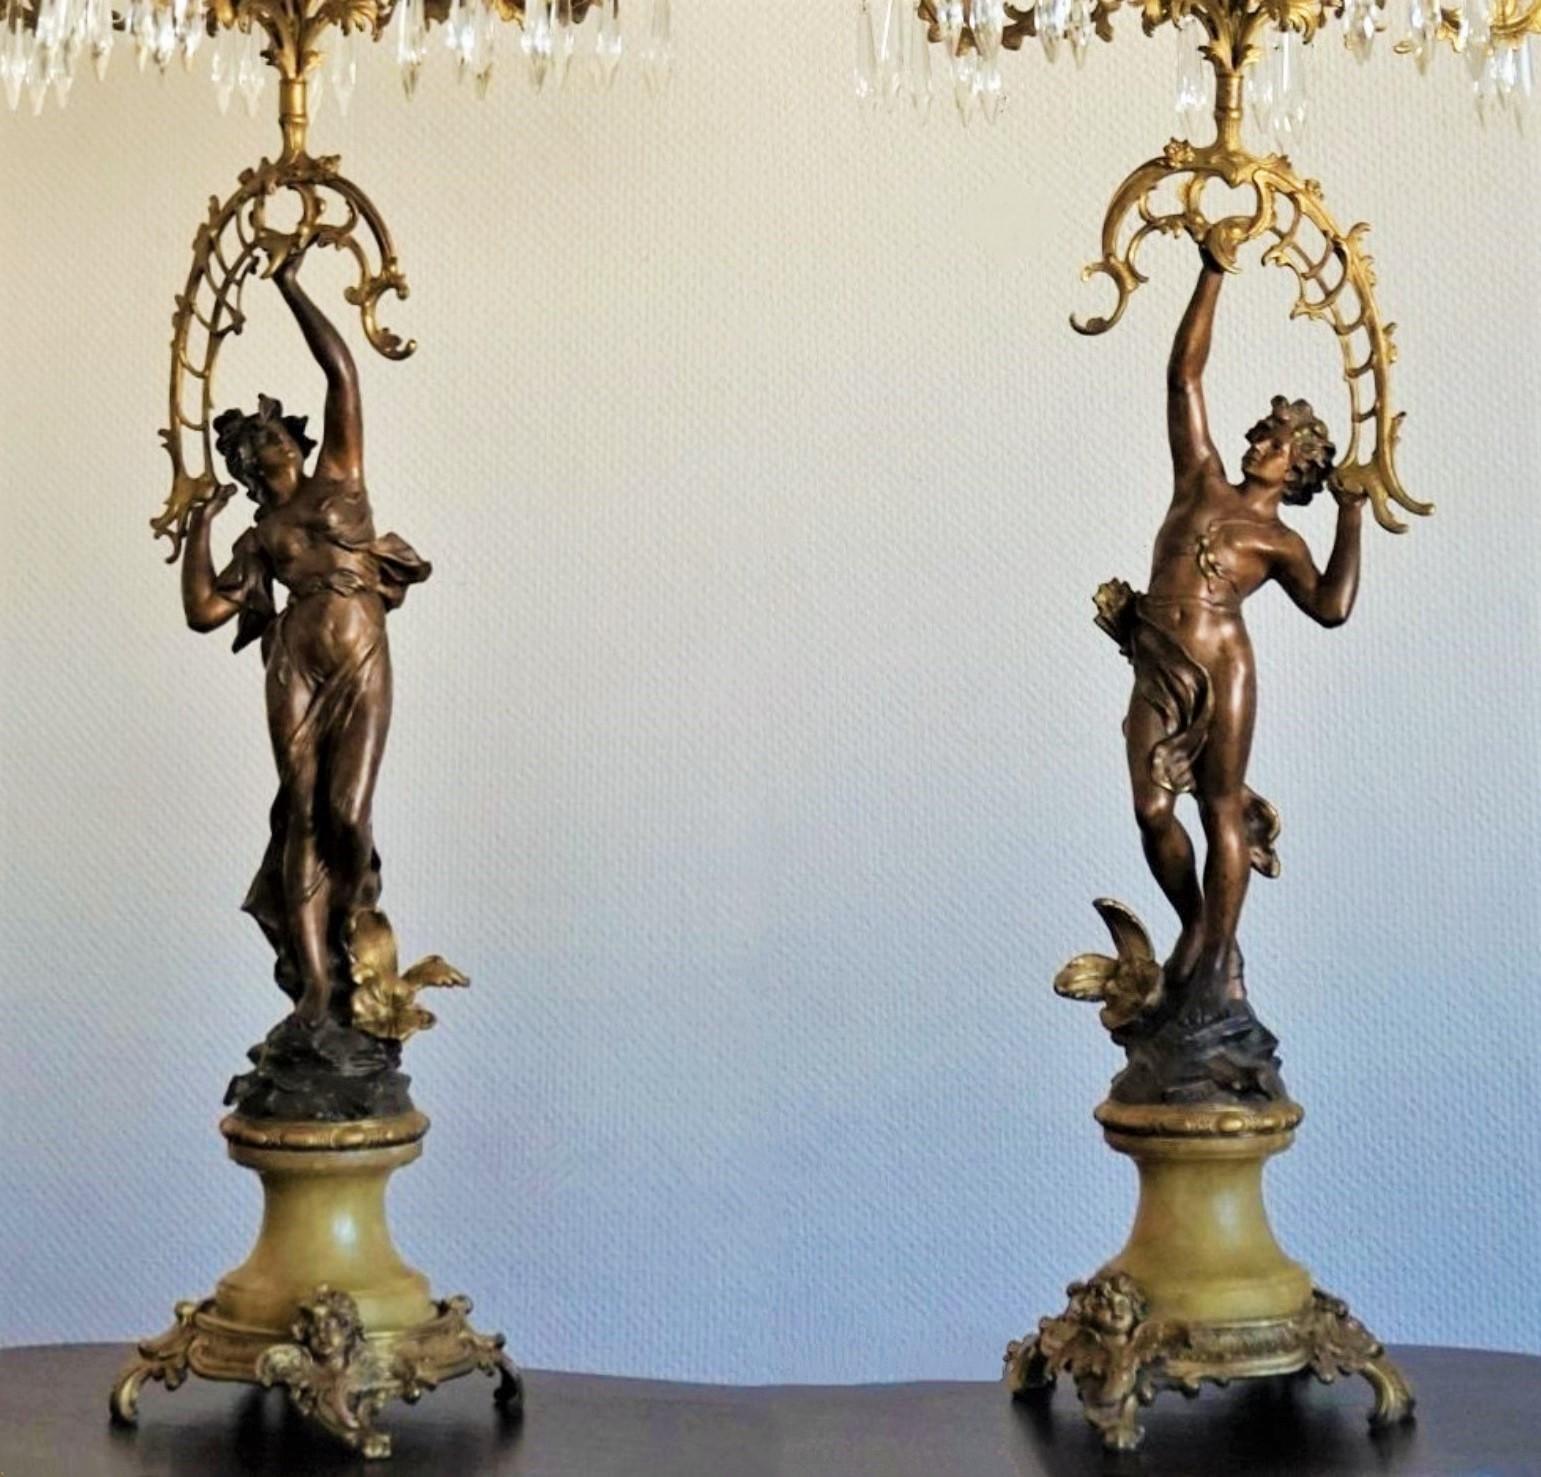 Empire Pair of French Gilt and Patinated Bronze Figurines Candelabras, 19th Century For Sale